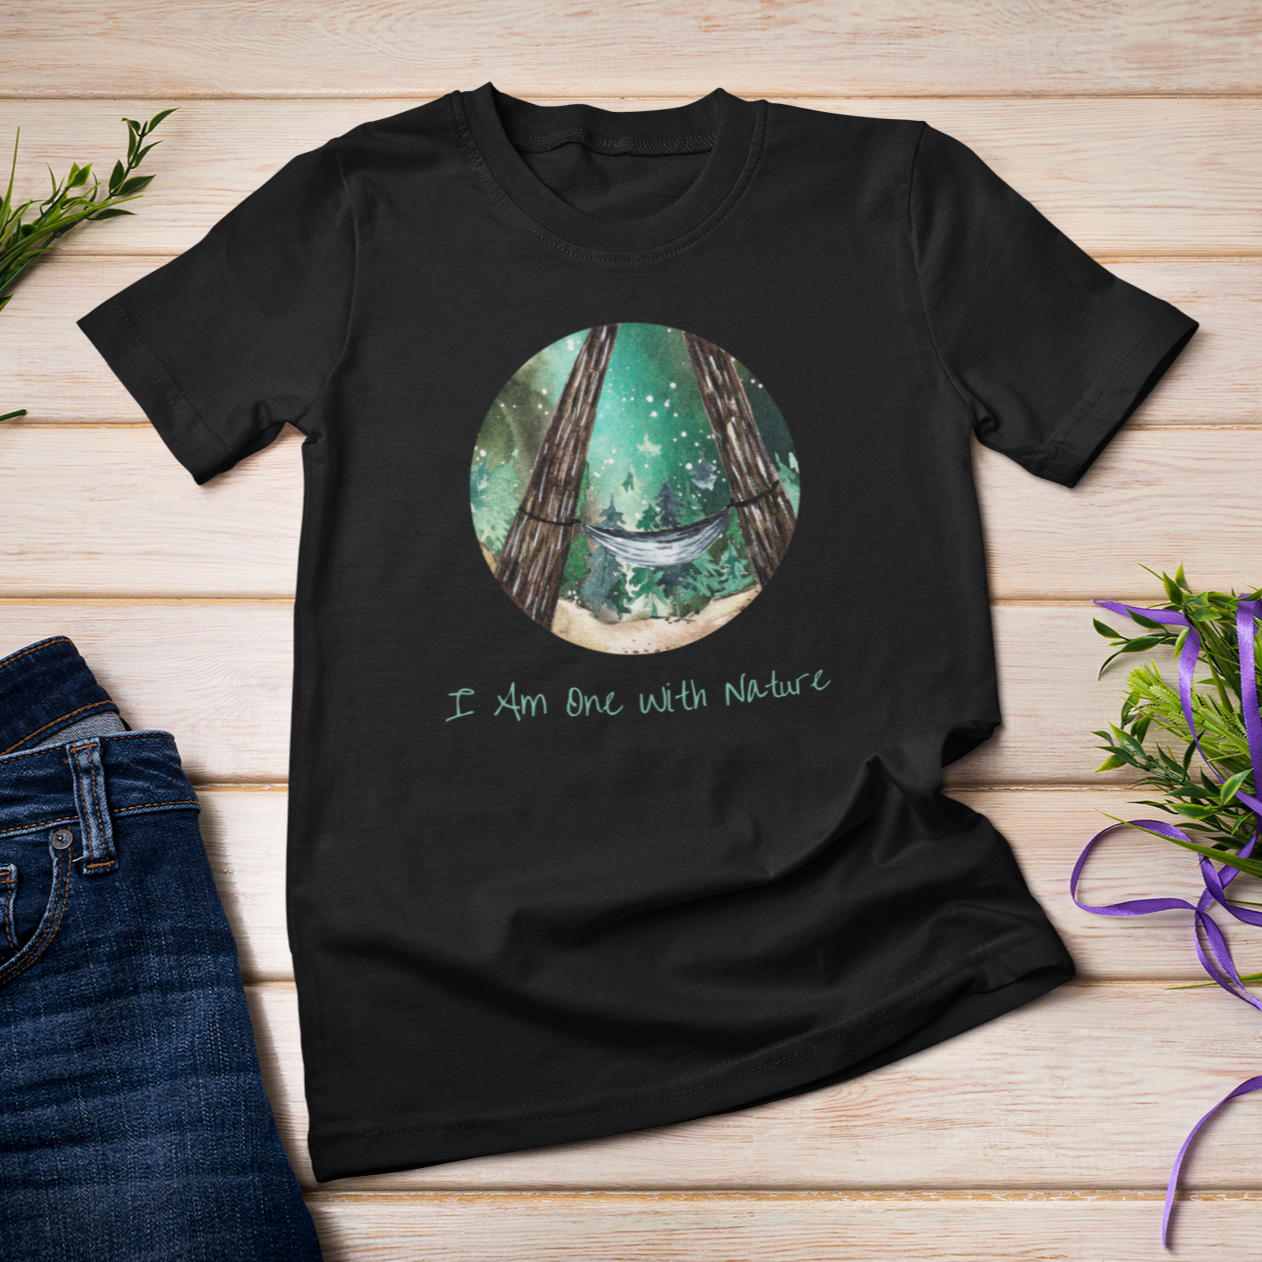 Story of Awakening Lifestyle Community Spirituality Relationships Love Light Meditation Oneness Earth Balance Healing Shop Store Charity Tree Nature Read Write T shirt Tops Tees Clothing Women Horoscope Organic I Am One With Nature Quote